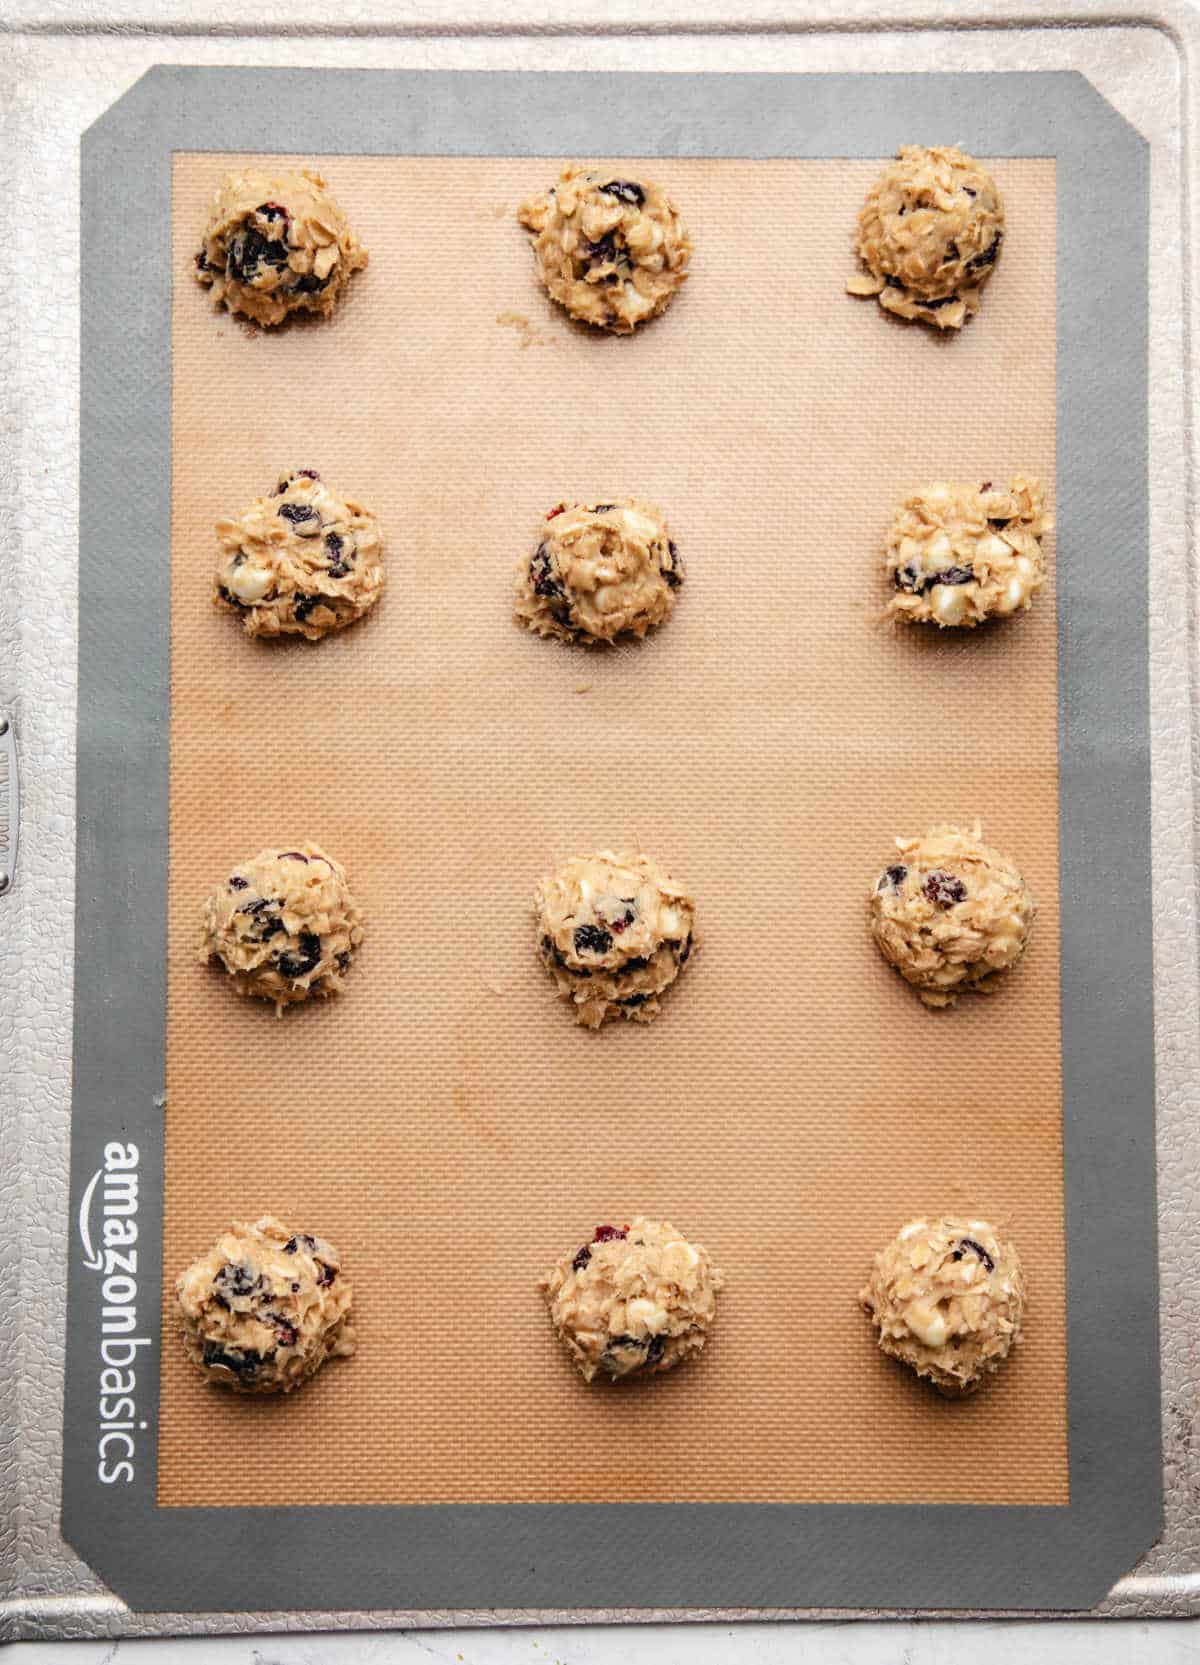 Cranberry oatmeal cookie dough on a prepared baking sheet.